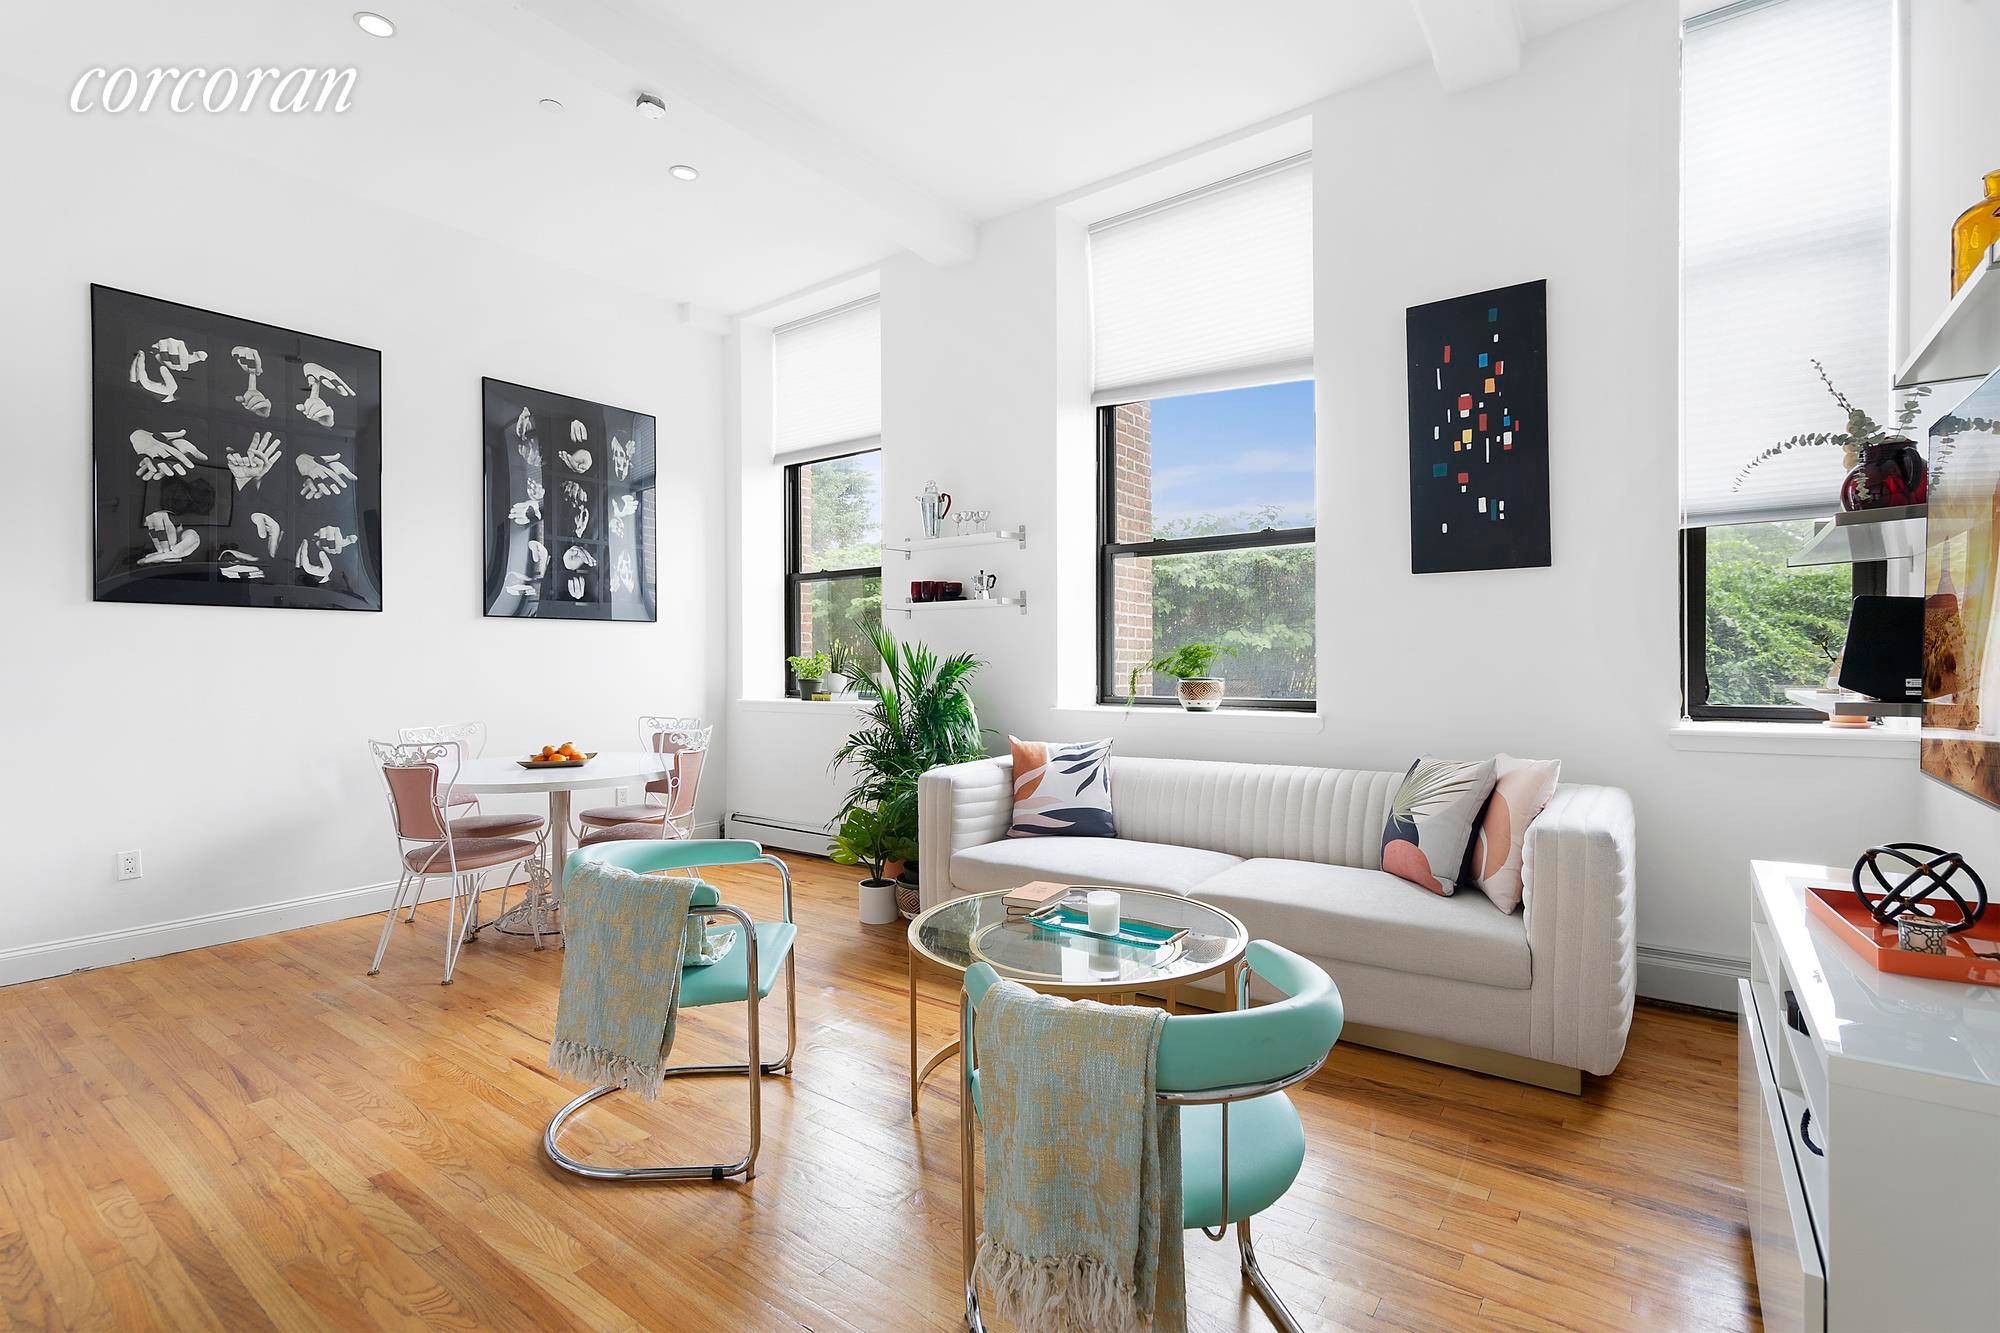 Gorgeous 2Bed 2 Bath Loft condo with deeded parking in Glendale, moments away from so many classic businesses as well as the burgeoning creative energy of the Ridgewood revival !